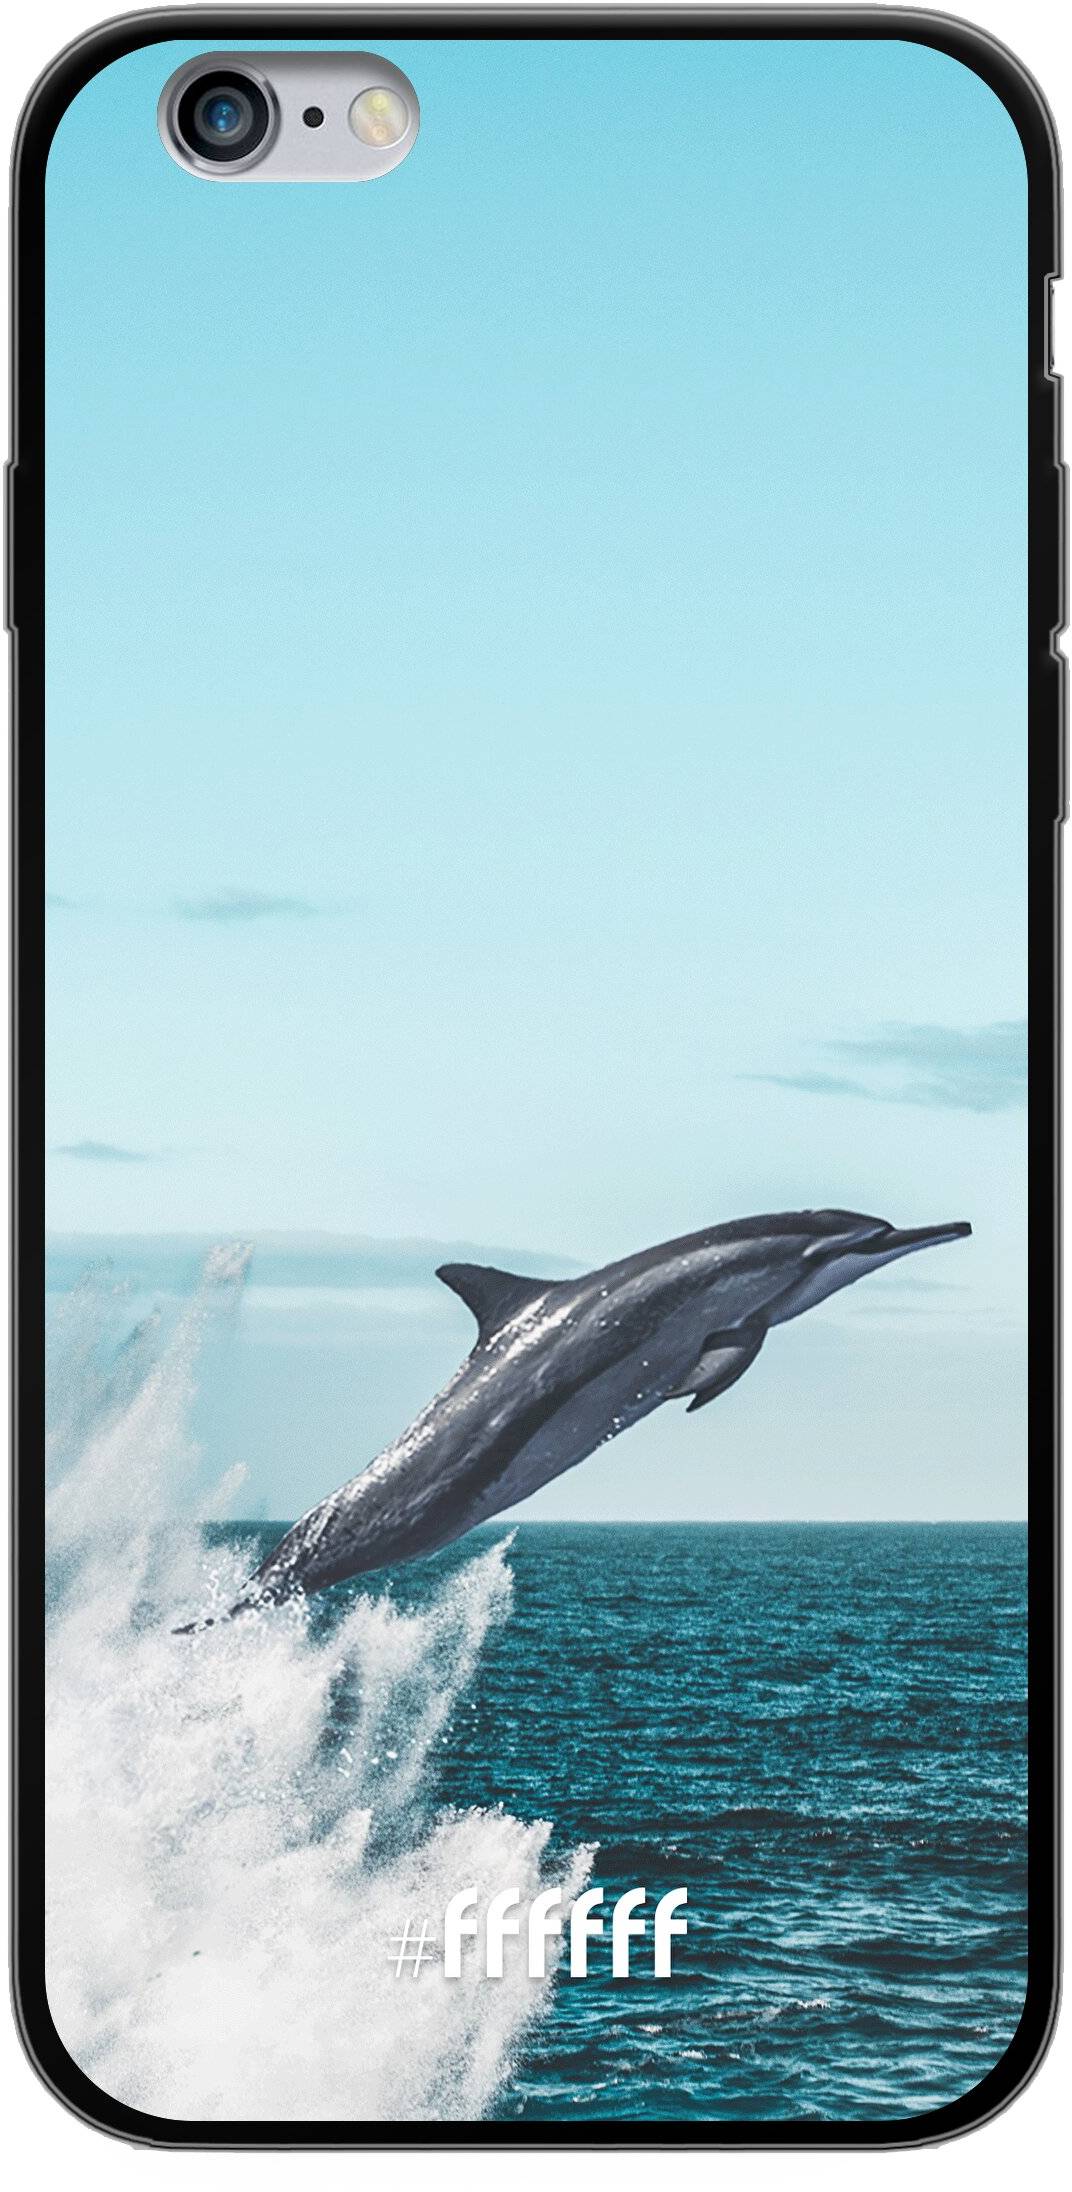 Dolphin iPhone 6s